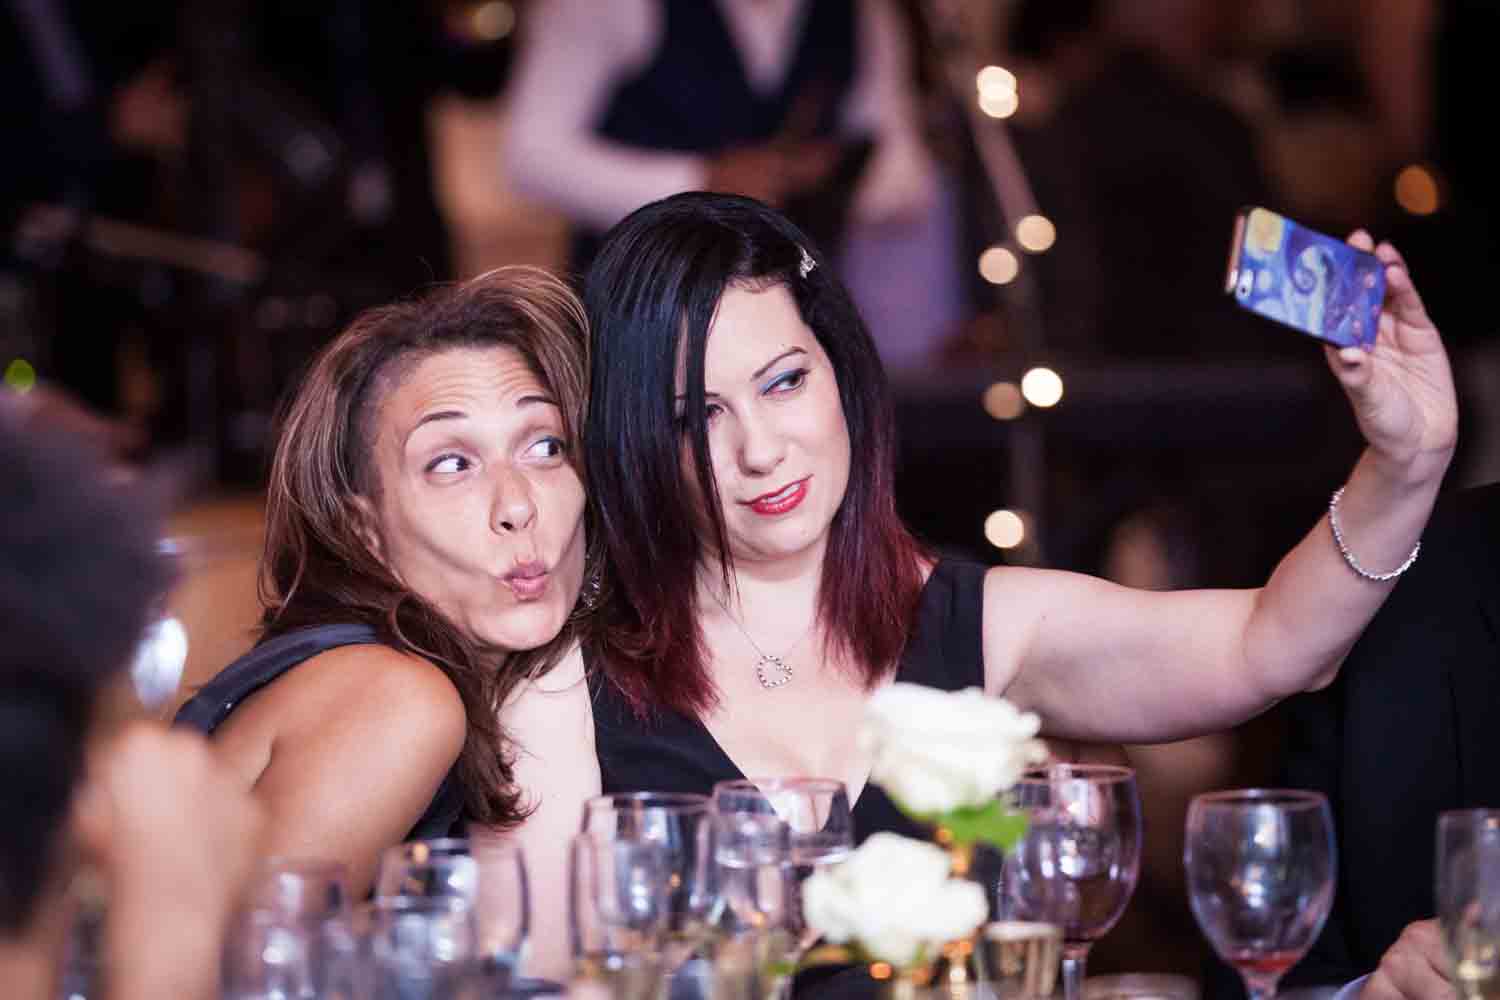 India House wedding photos of two female guests taking a selfie at a table